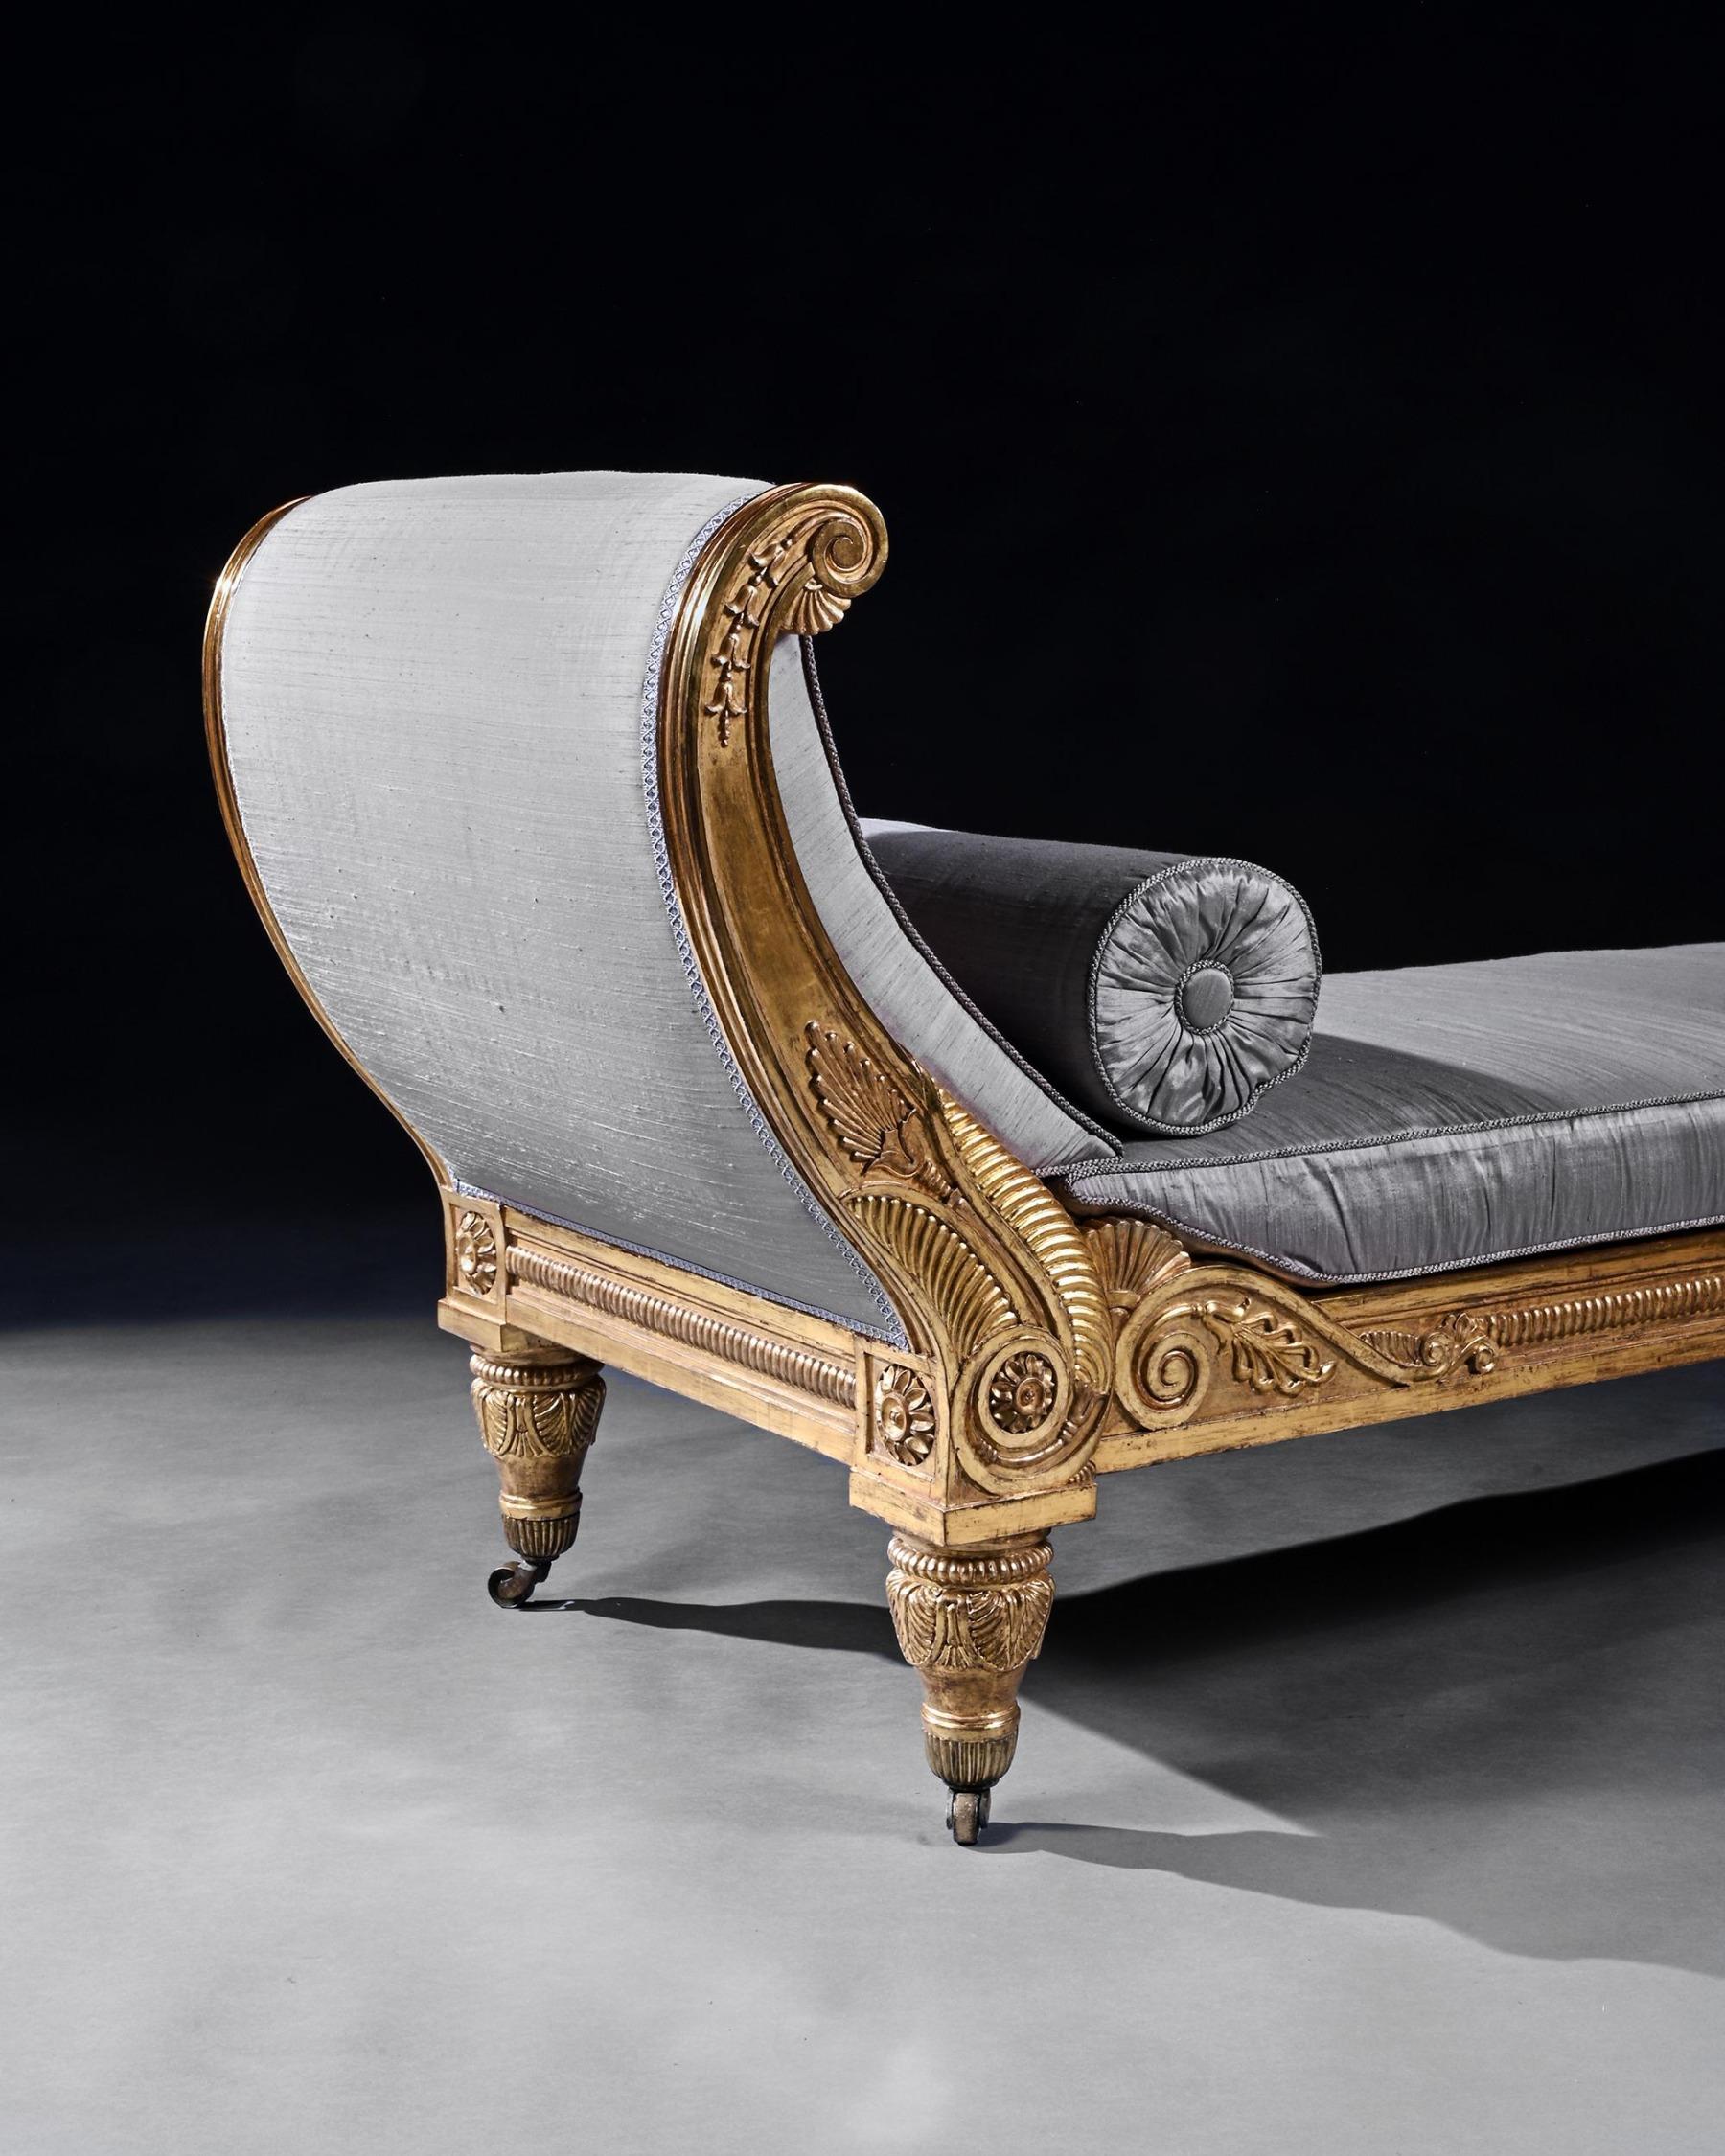 English Morel and Hughes Regency Carved Giltwood Daybed Likely Made for Badminton House 